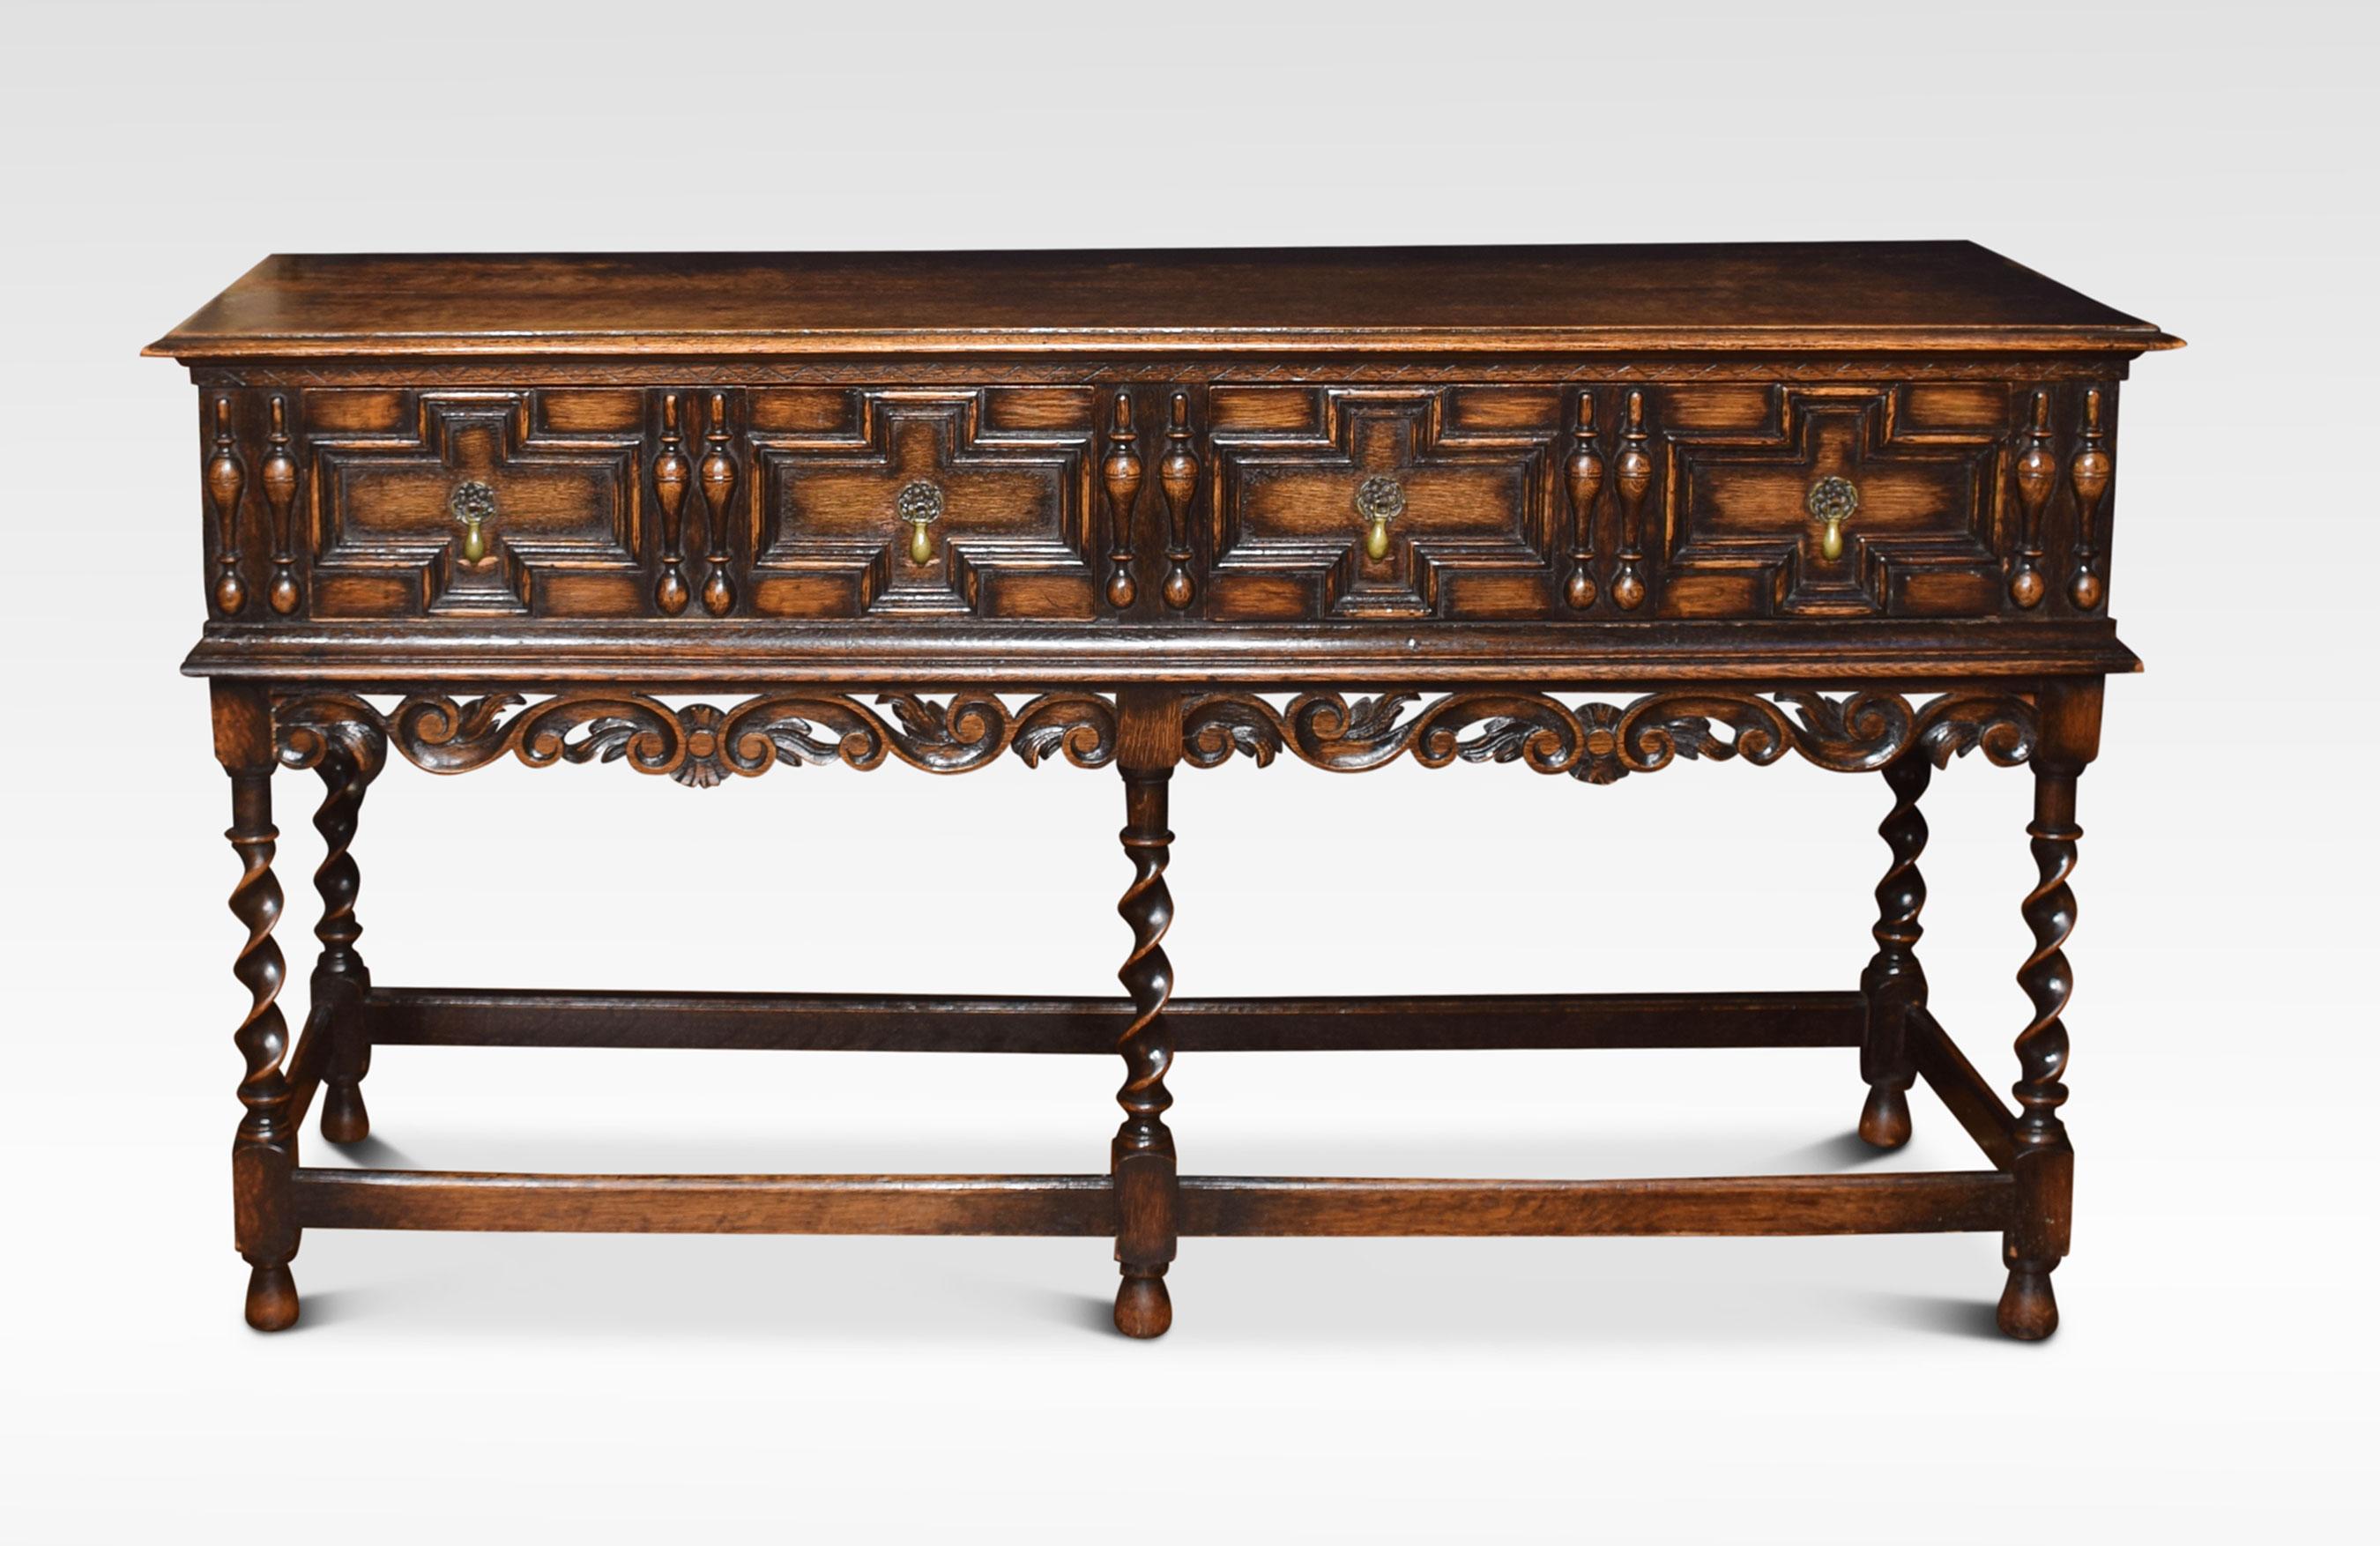 Early 20th century oak sideboard of Jacobean design, the large rectangular top with moulded edge above four freezes drawers with brass drop handles. All raised up on barley twist supports united by stretchers.
Dimensions:
Height 30 inches
Width